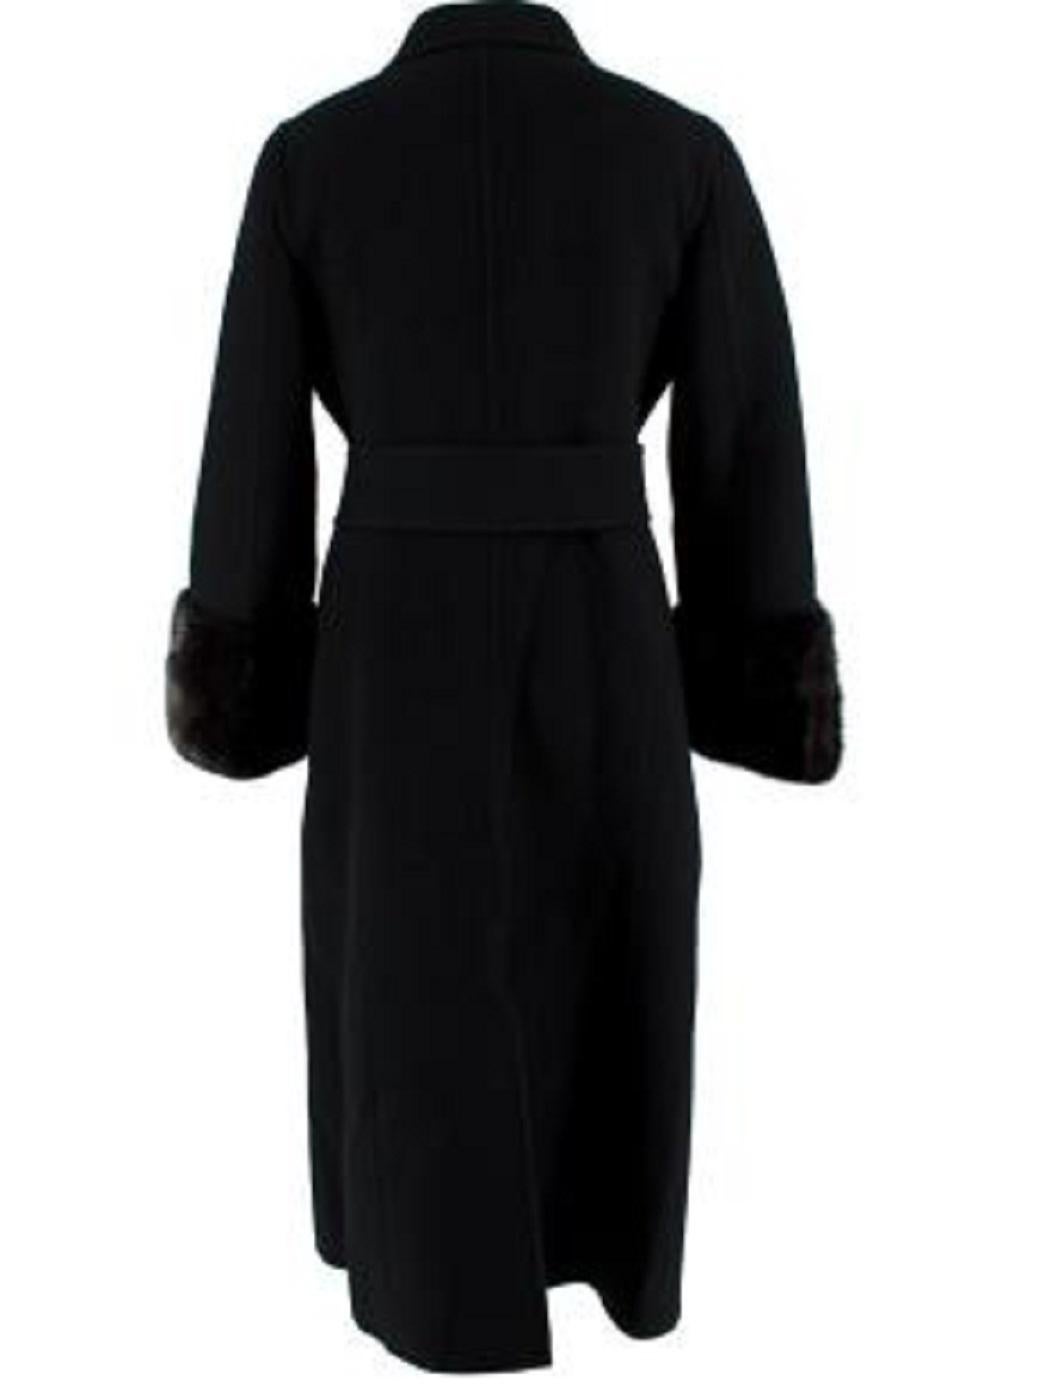 Fendi Black Wool Longline Coat with Mink Fur Cuffs

- Mid weight wool
- Soft mink fur embellished cuffs 
- Slim fitting 
- Mid length 
- Double breasted  button fastening

Materials:
Body: 100% Wool
Cuffs: 100% Mink
Other: 100% Silk 

Made in Italy